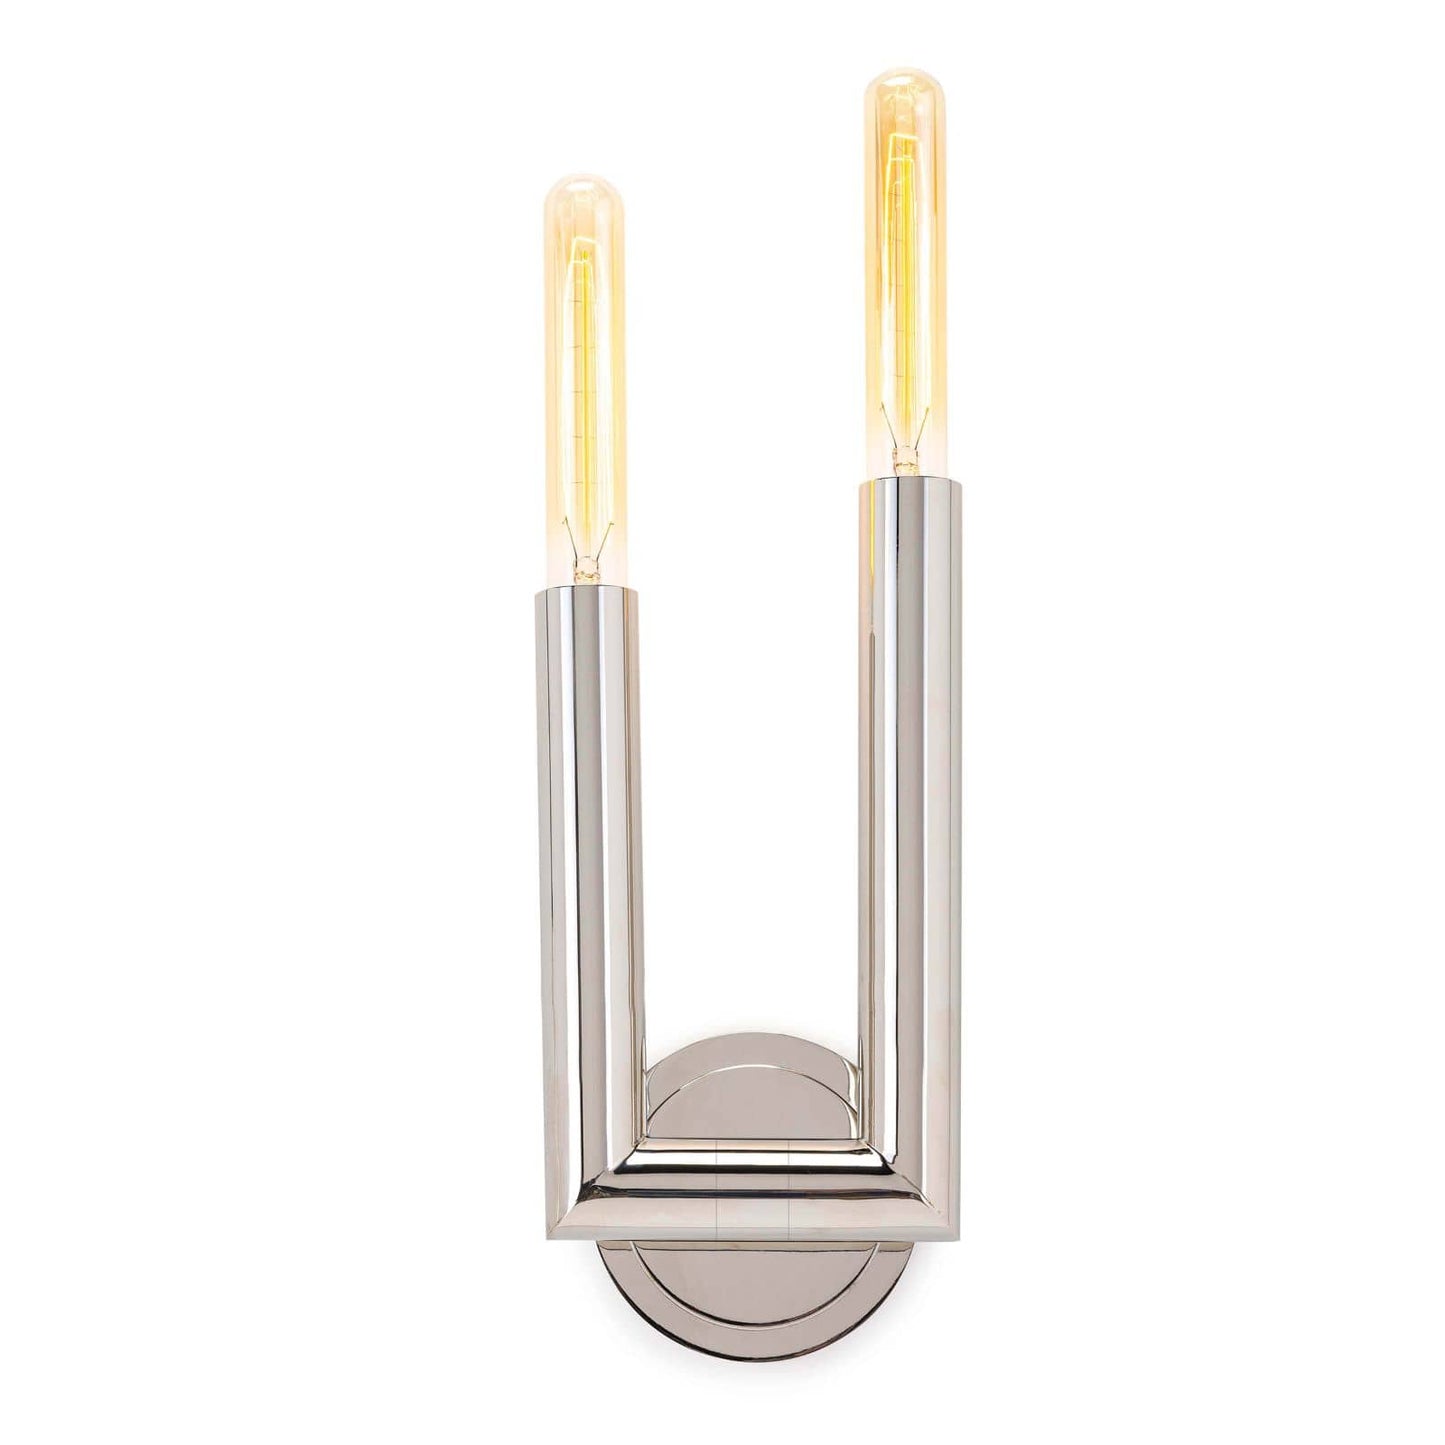 Wolfe Sconce in Polished Nickel by Regina Andrew